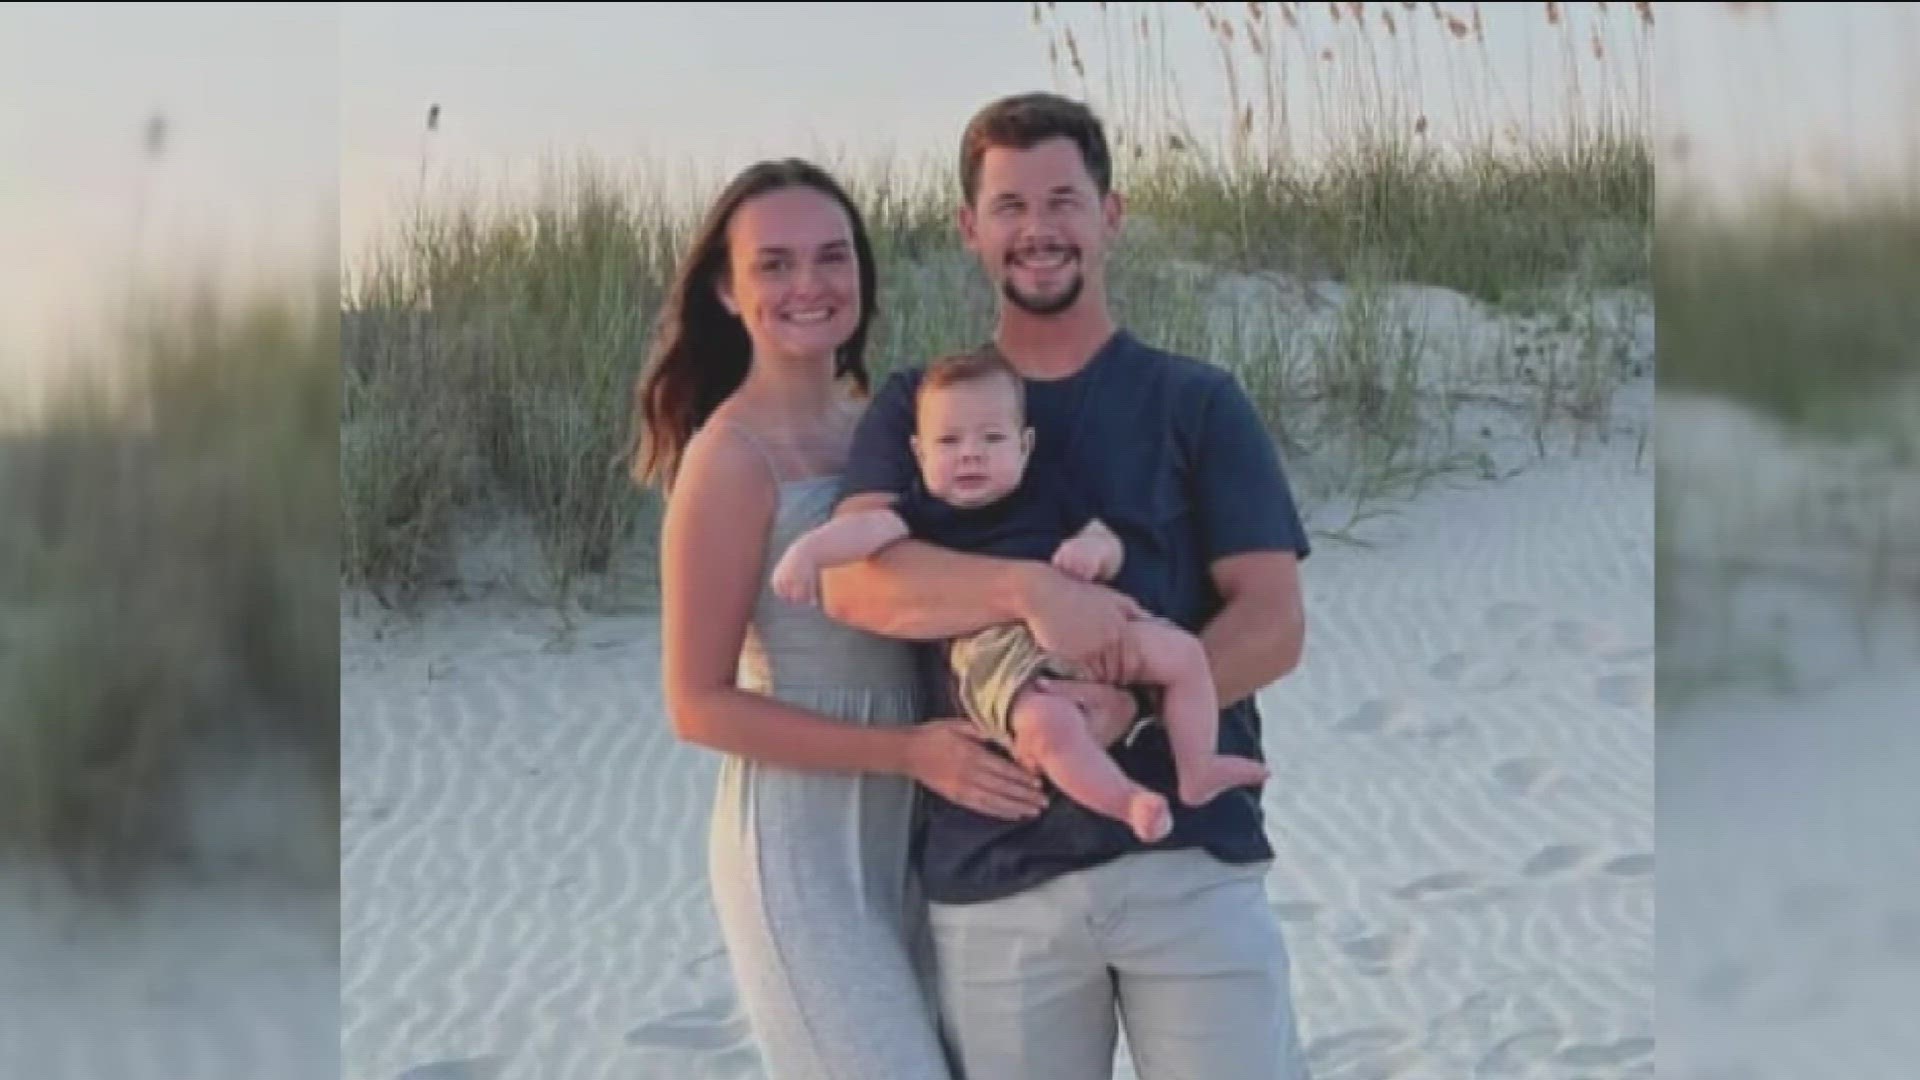 Beckett's parents, Savannah Harding and Jacob Hahn, were killed in a car crash on Saturday. Since then, the community has stepped up in a massive show of support.